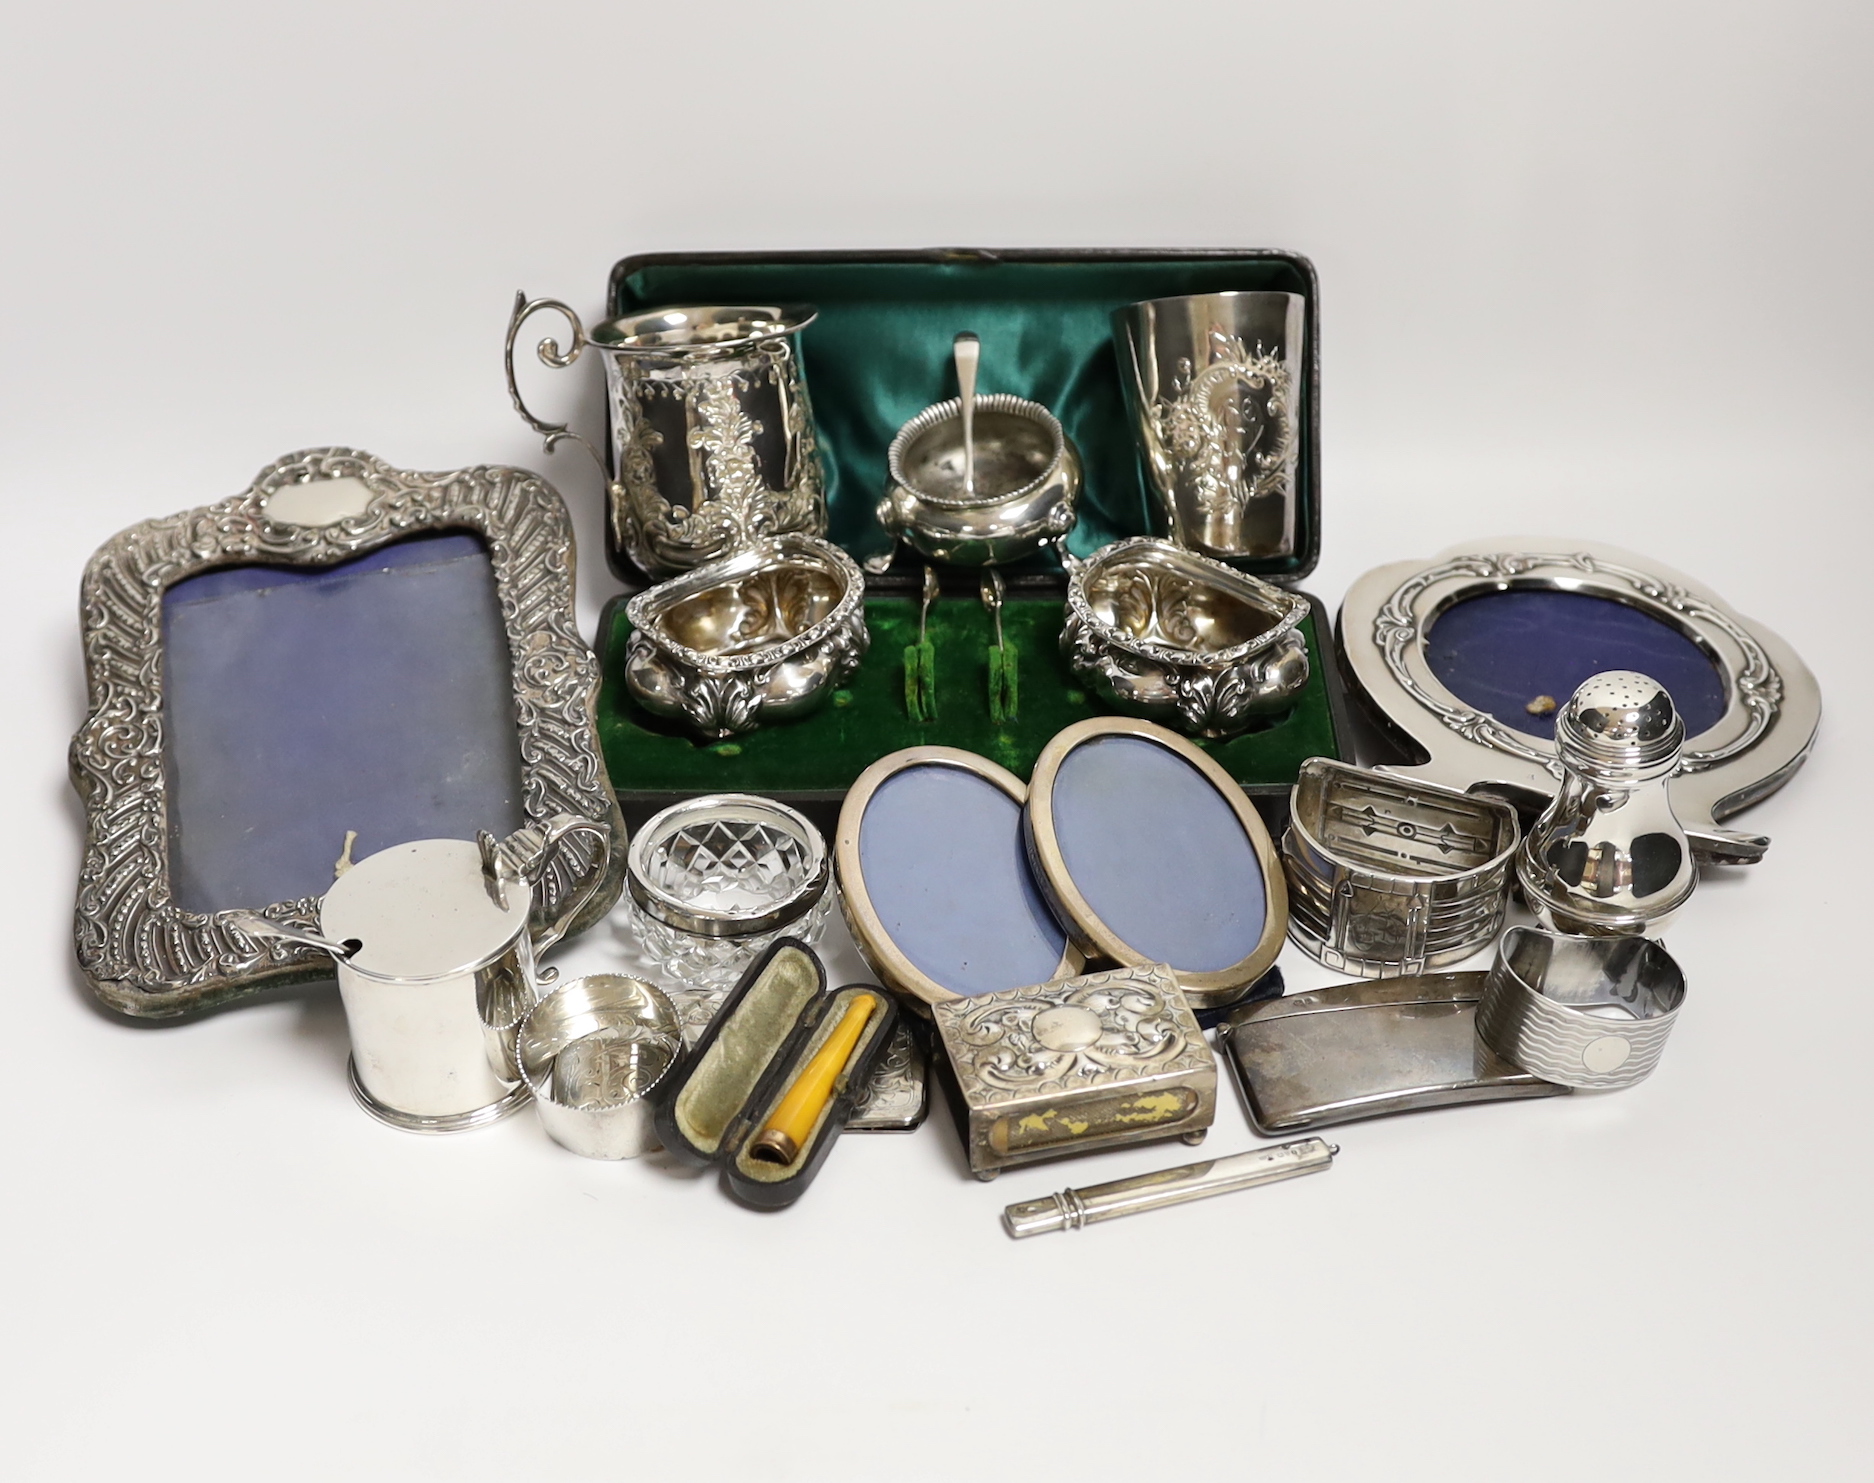 Sundry small silver and white metal items including Edwardian Christening mug, four mounted photograph frames, napkin rings, card cases, bun pepperette etc.